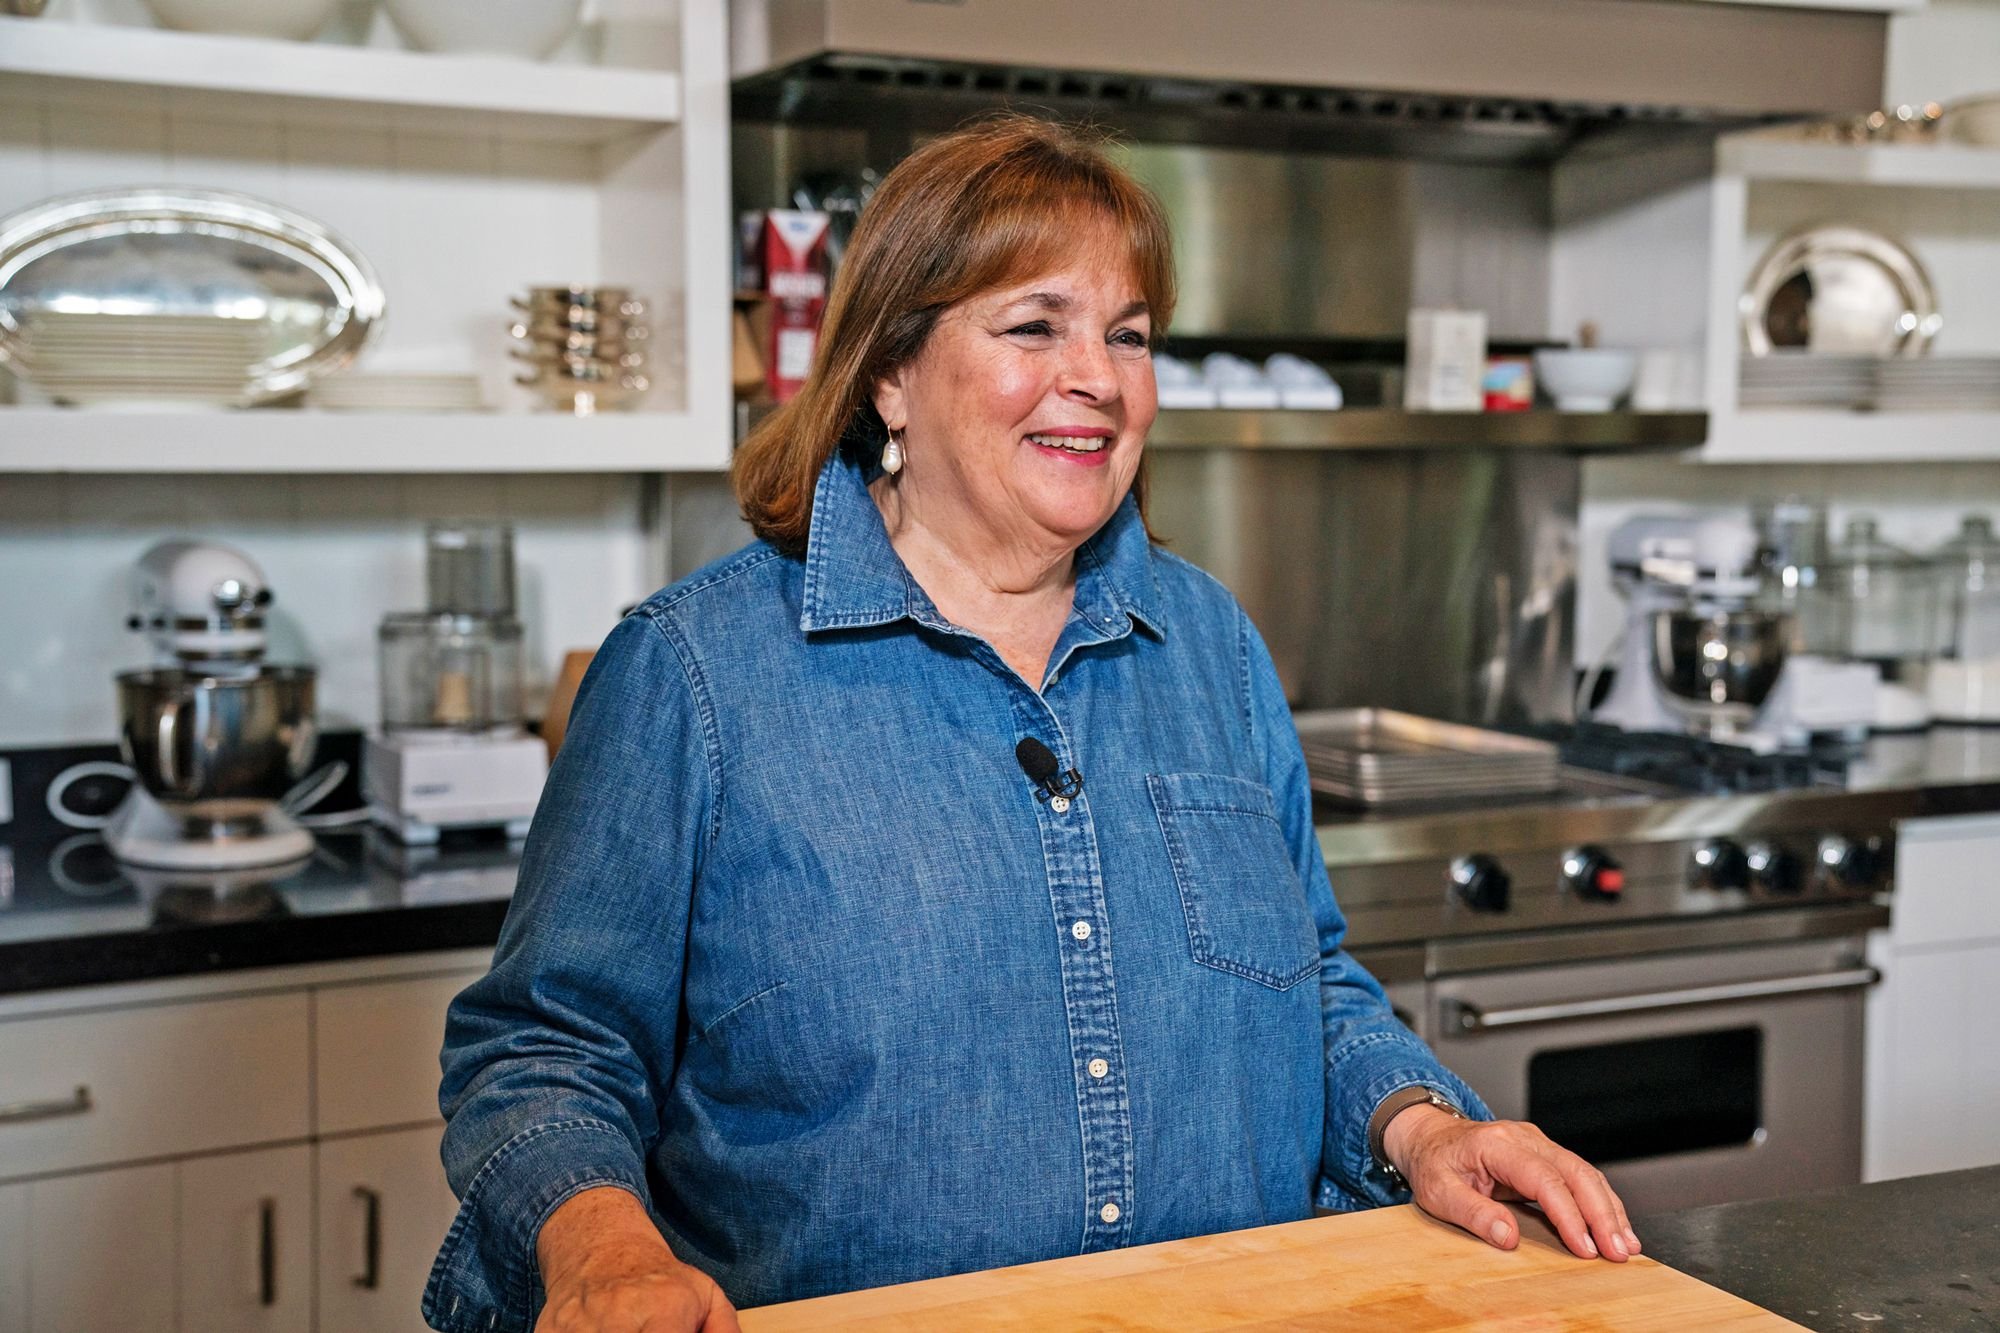 10 Tips from Ina Garten That Improved the Quality of My Life